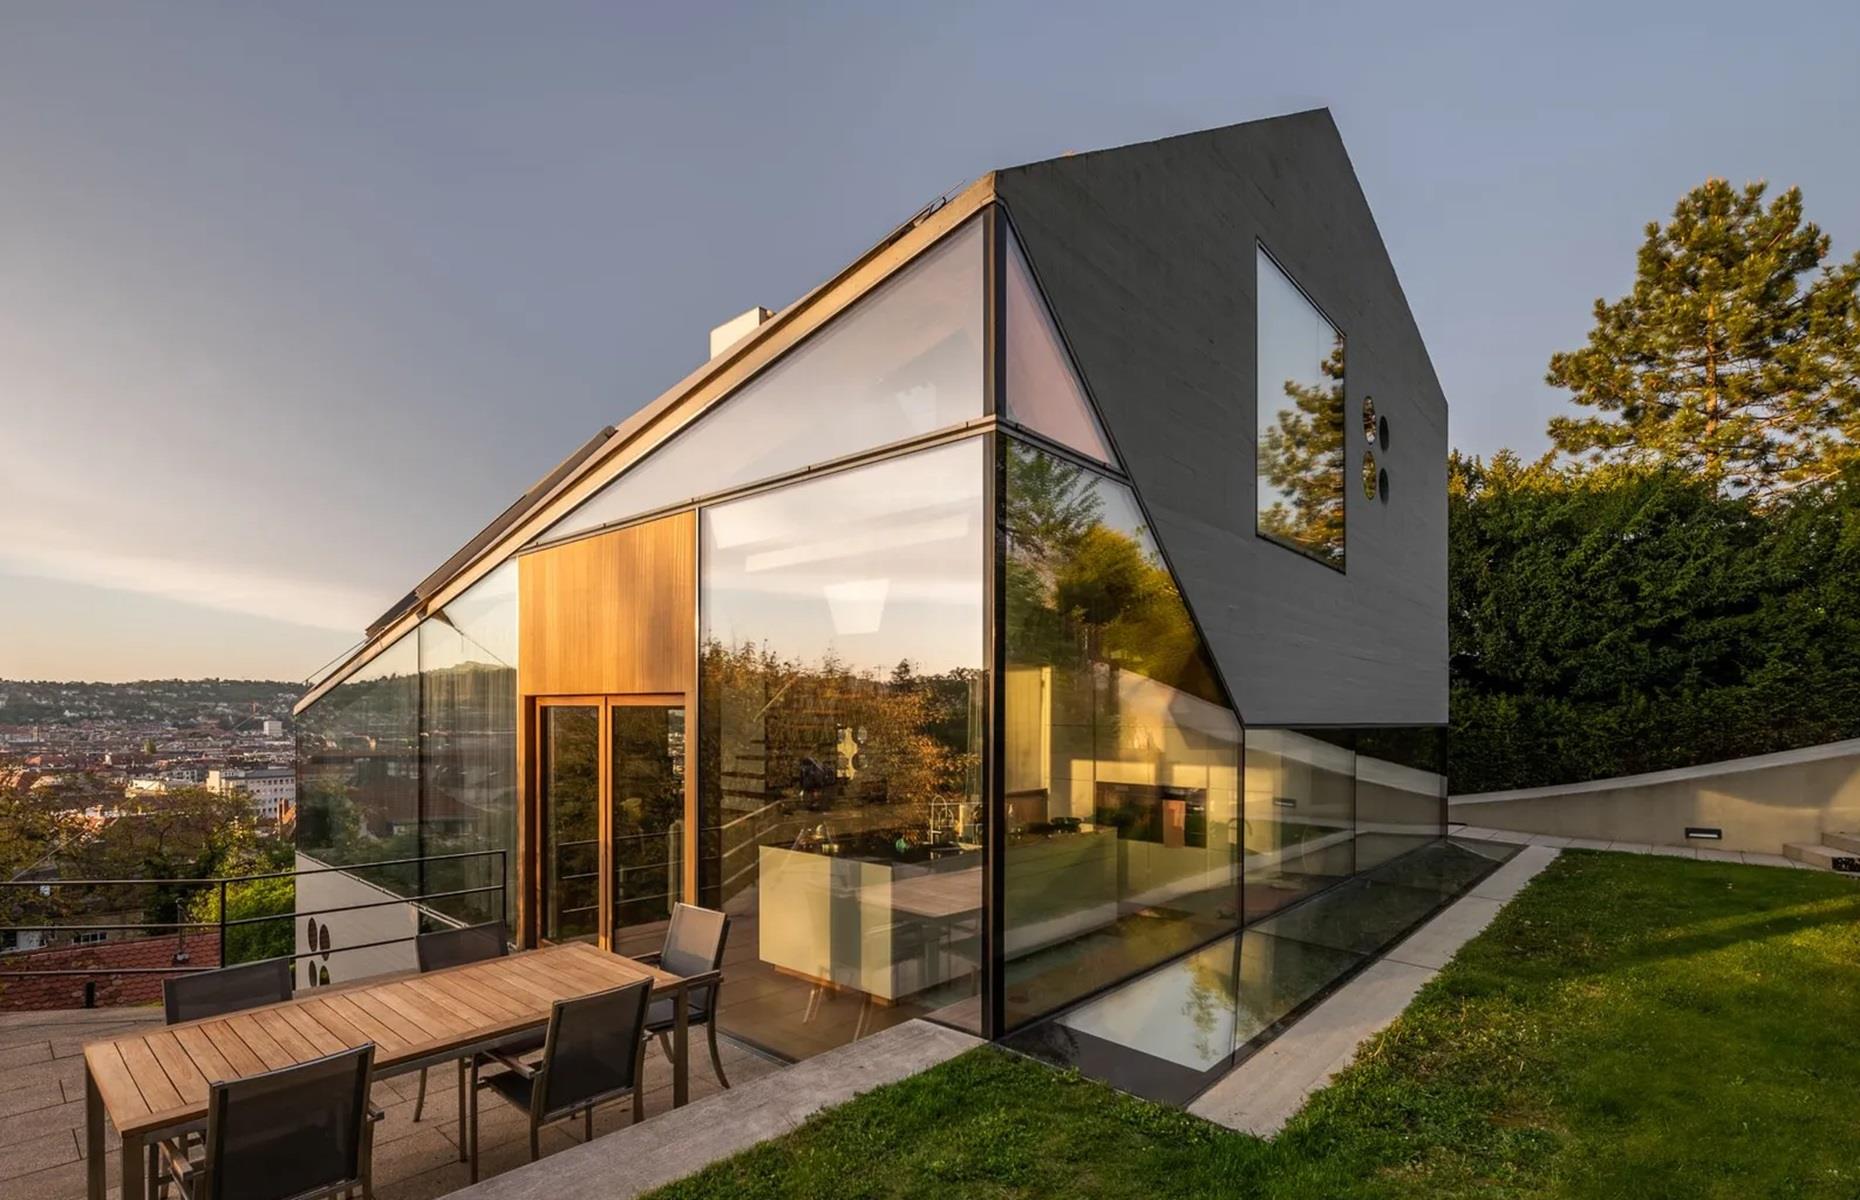 <p>Over in Stuttgart, Germany, you'll find this unusual <a href="https://www.loveproperty.com/gallerylist/68139/gorgeous-glass-houses-that-will-take-your-breath-away">glass home</a>. Built in 2014, the property sits on a slope and could certainly be described as a house of two halves. While the front is decorated in white render, the rear is covered in glass, allowing for amazing views across the city below.</p>